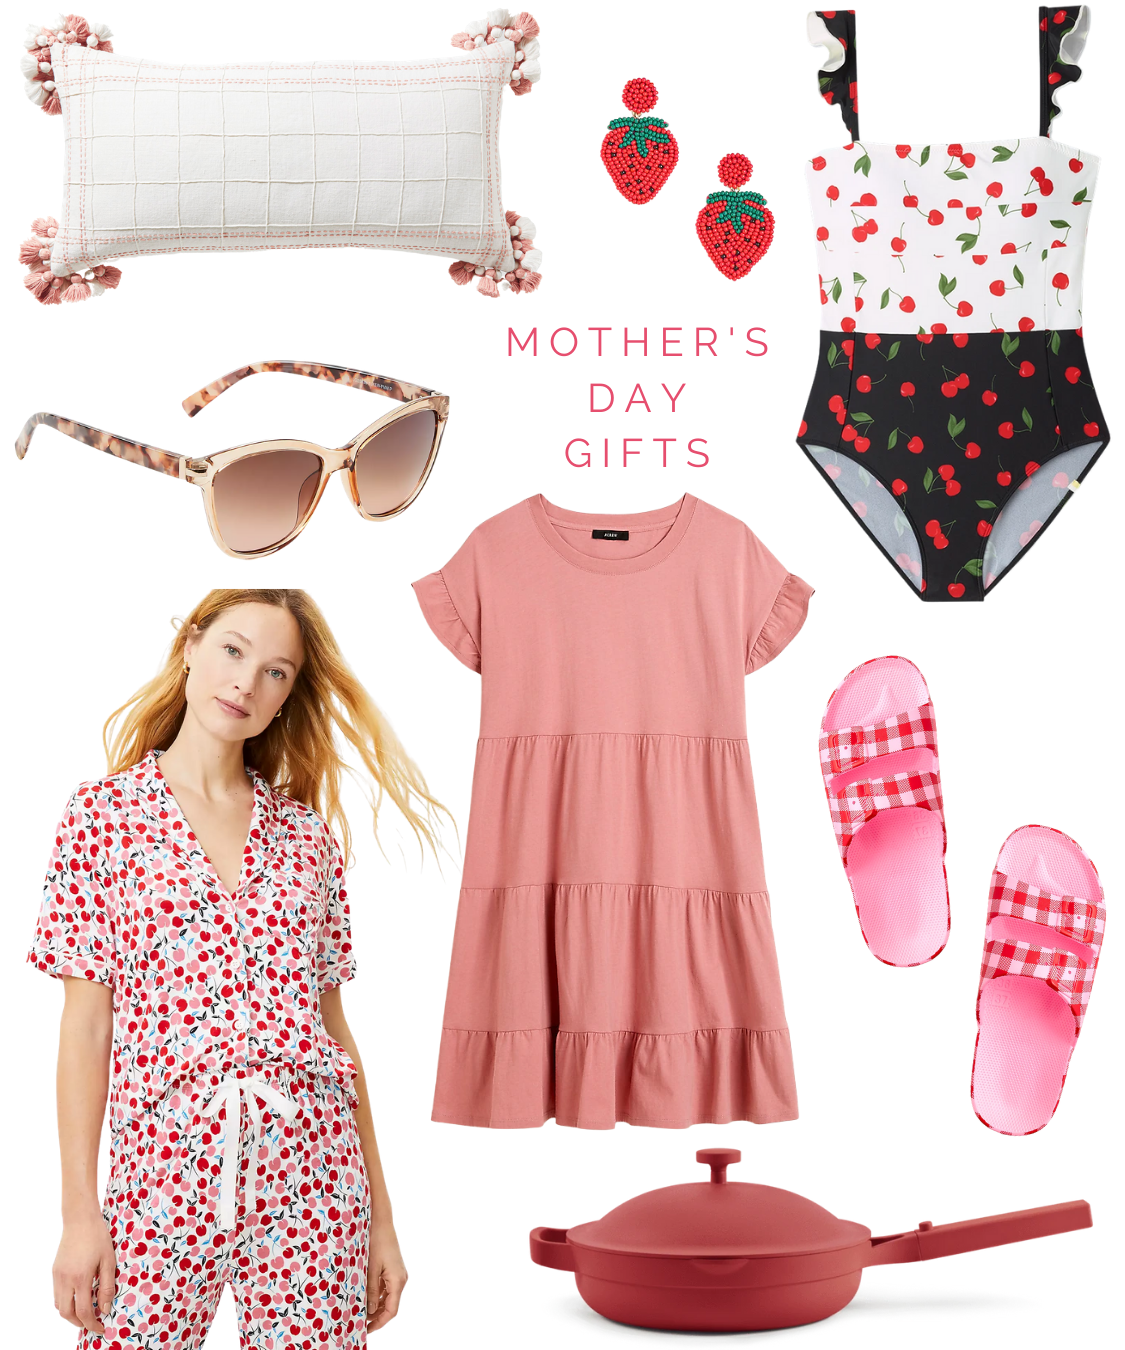 mother's day gifts to order online, mother day gifts online, buy mother's day gifts online